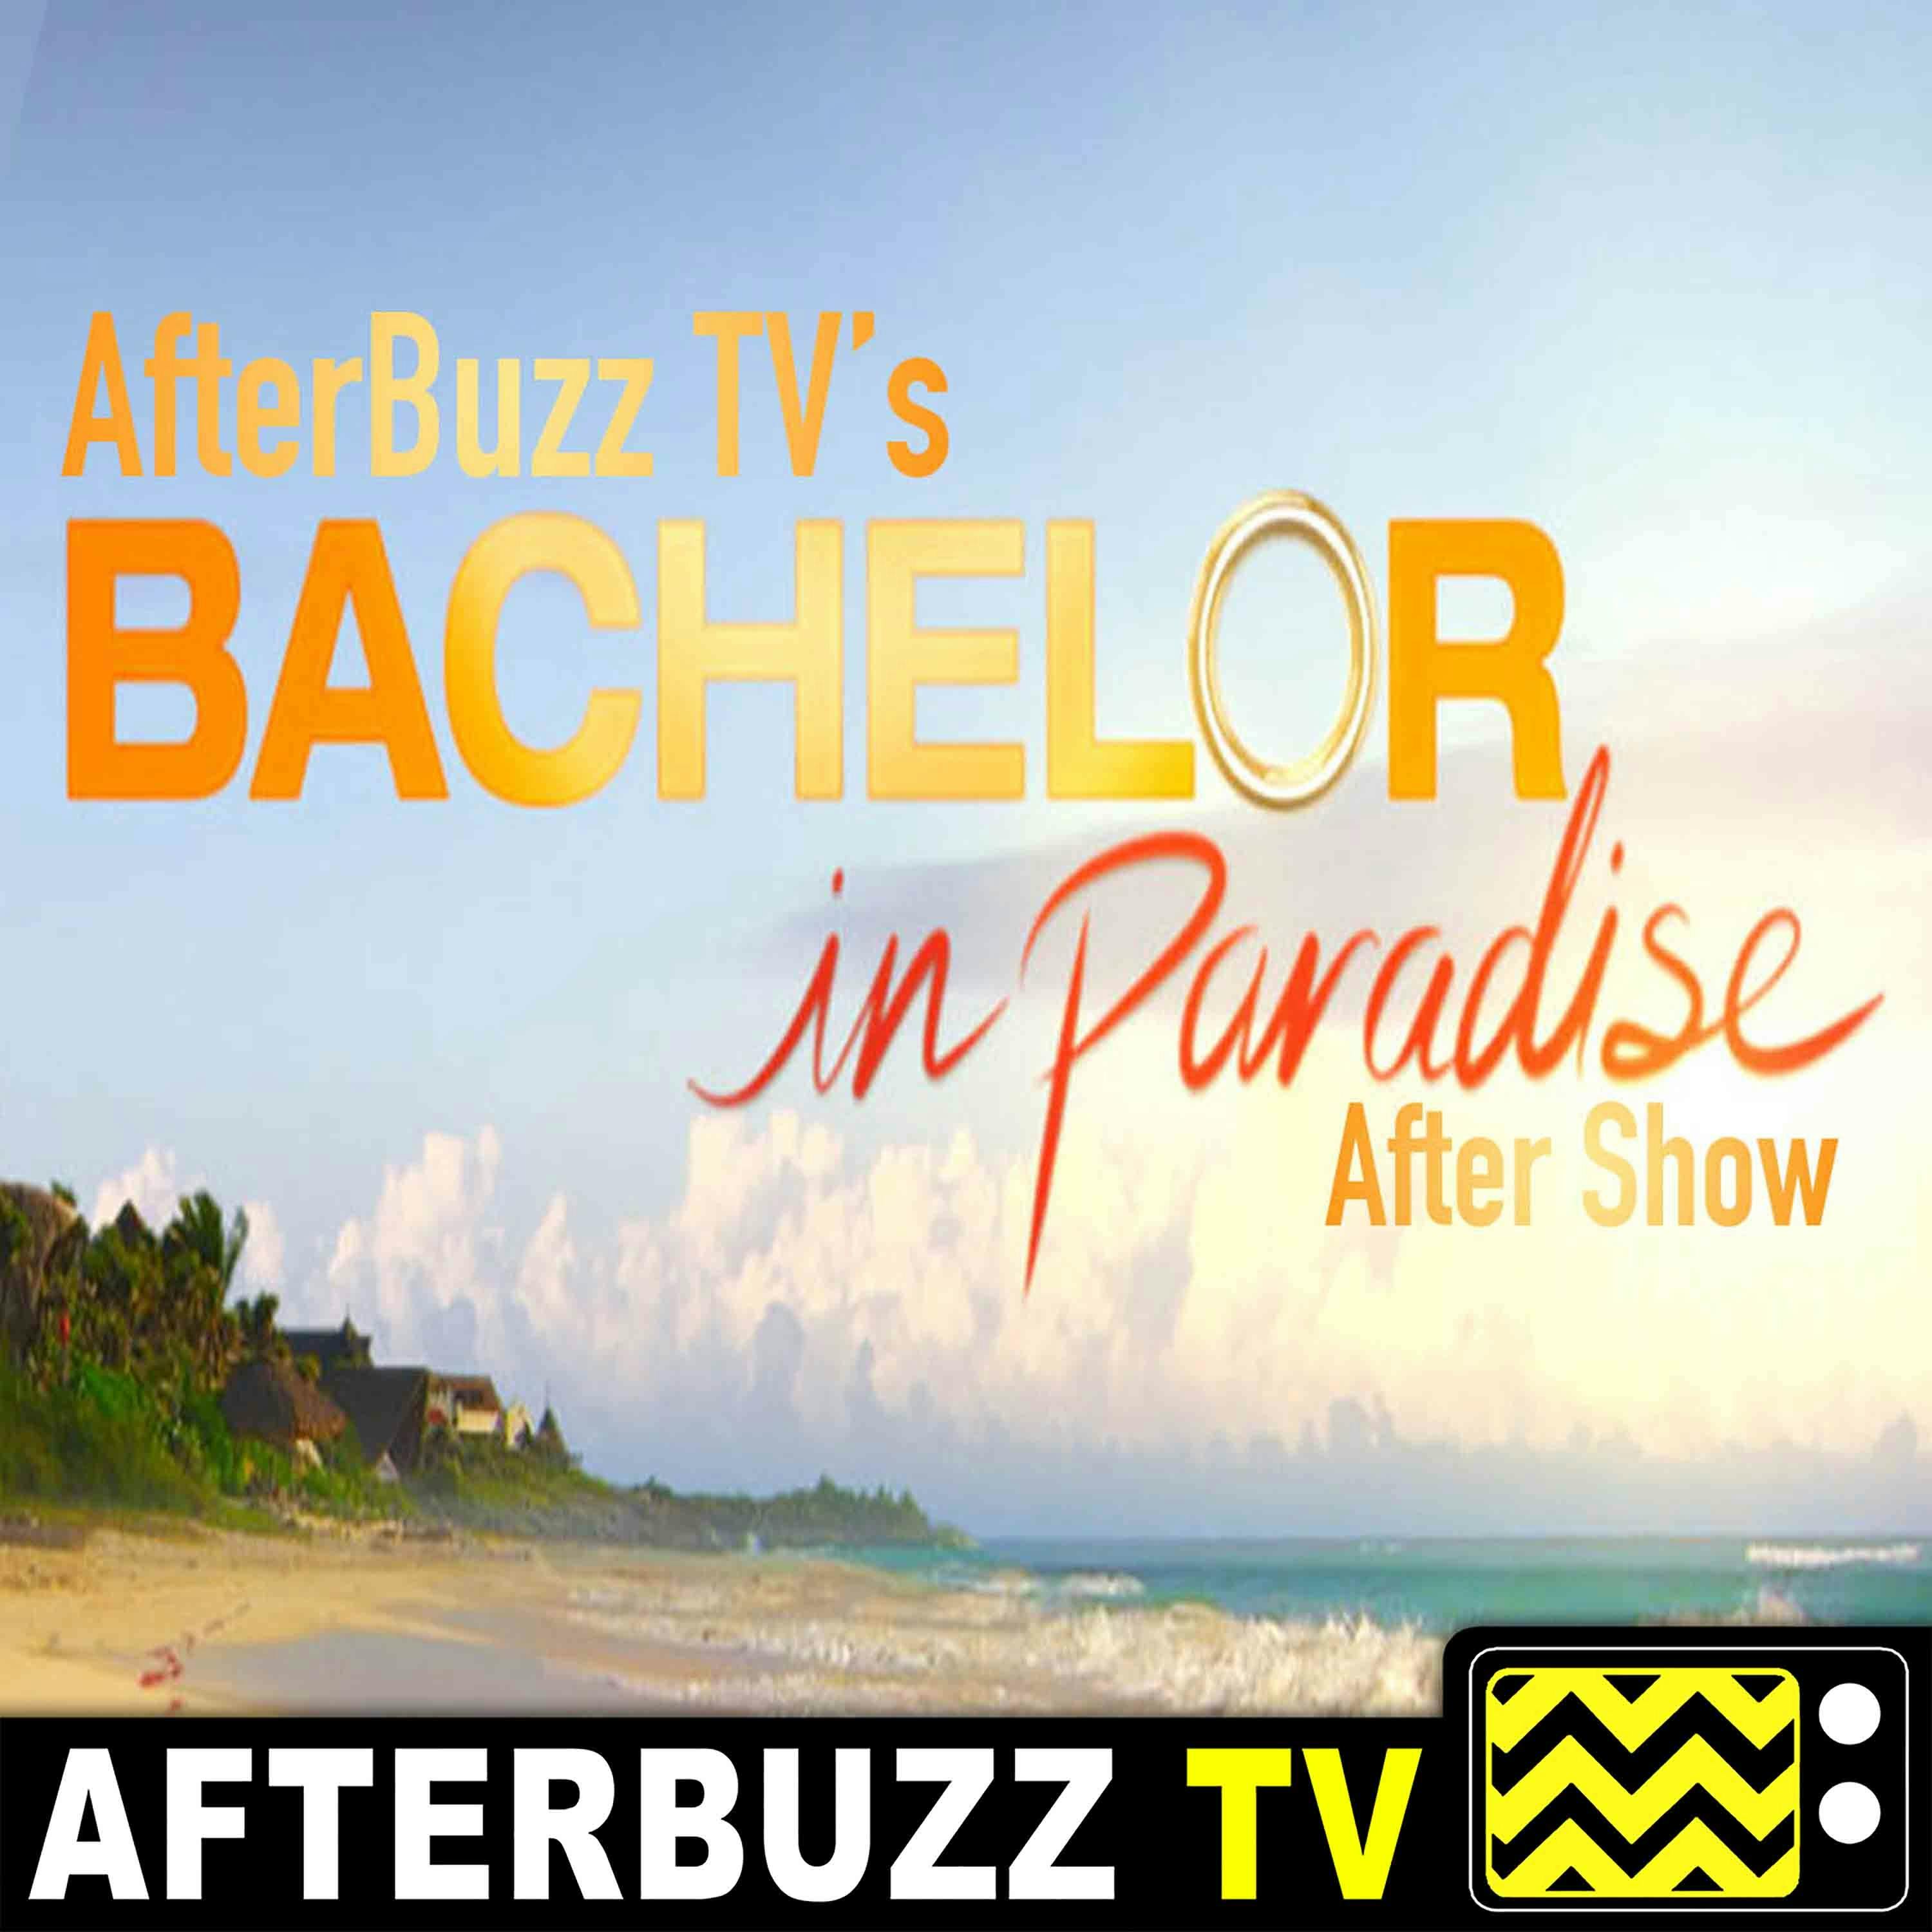 Bachelor In Paradise S:4 | Dominique Alexis & Eric Bigger Guest on Episodes 3 & 4 | AfterBuzz TV AfterShow